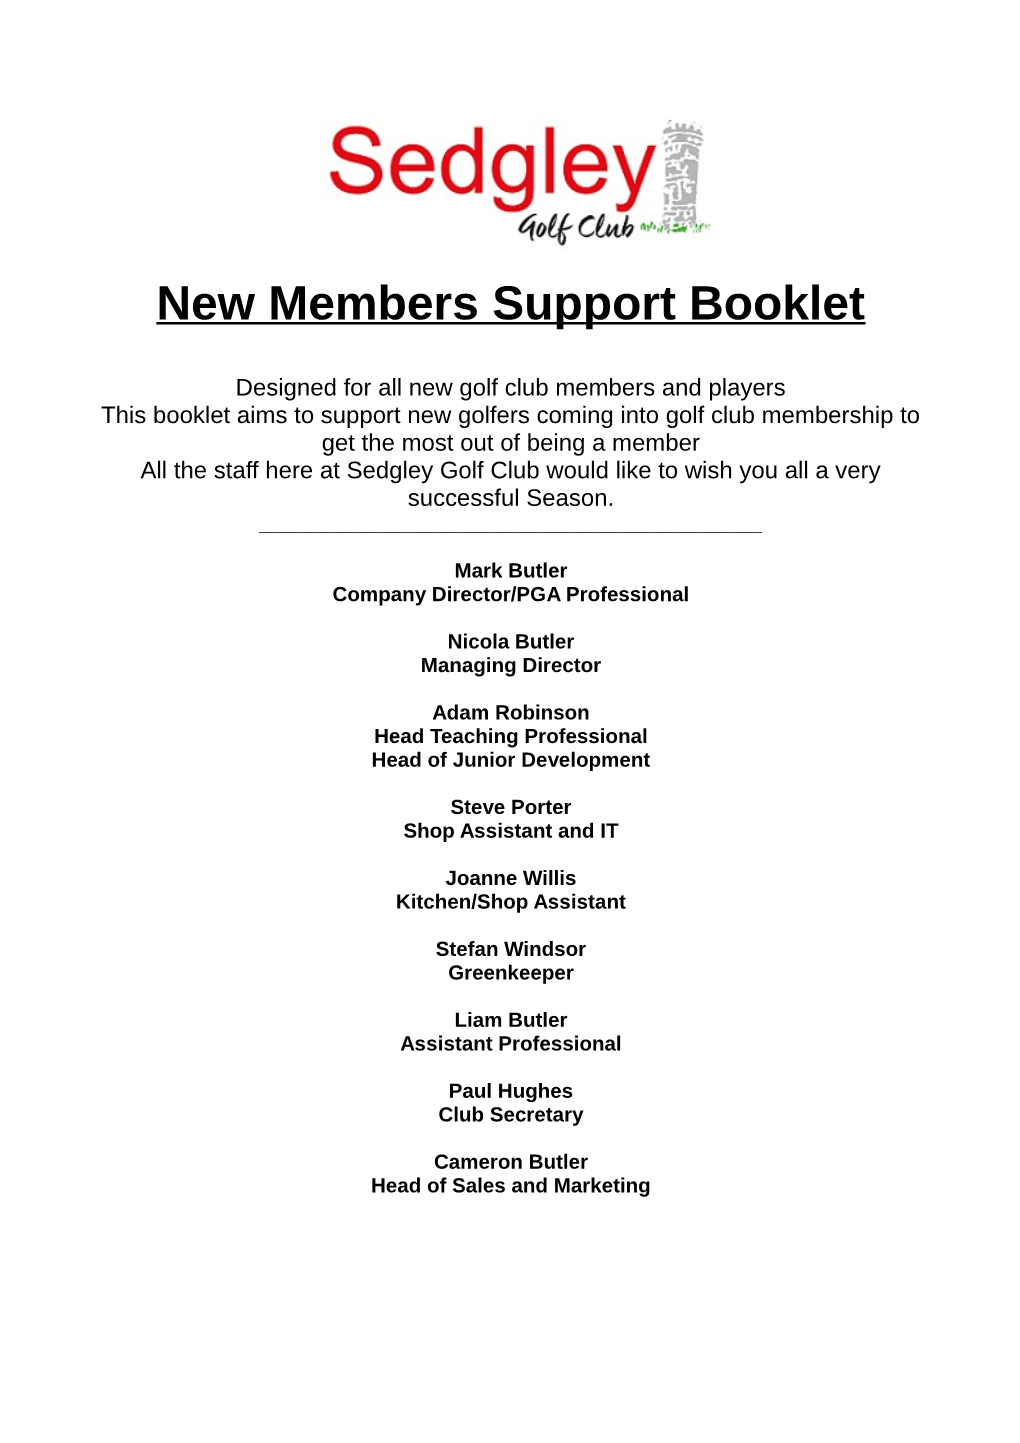 New Members Support Booklet